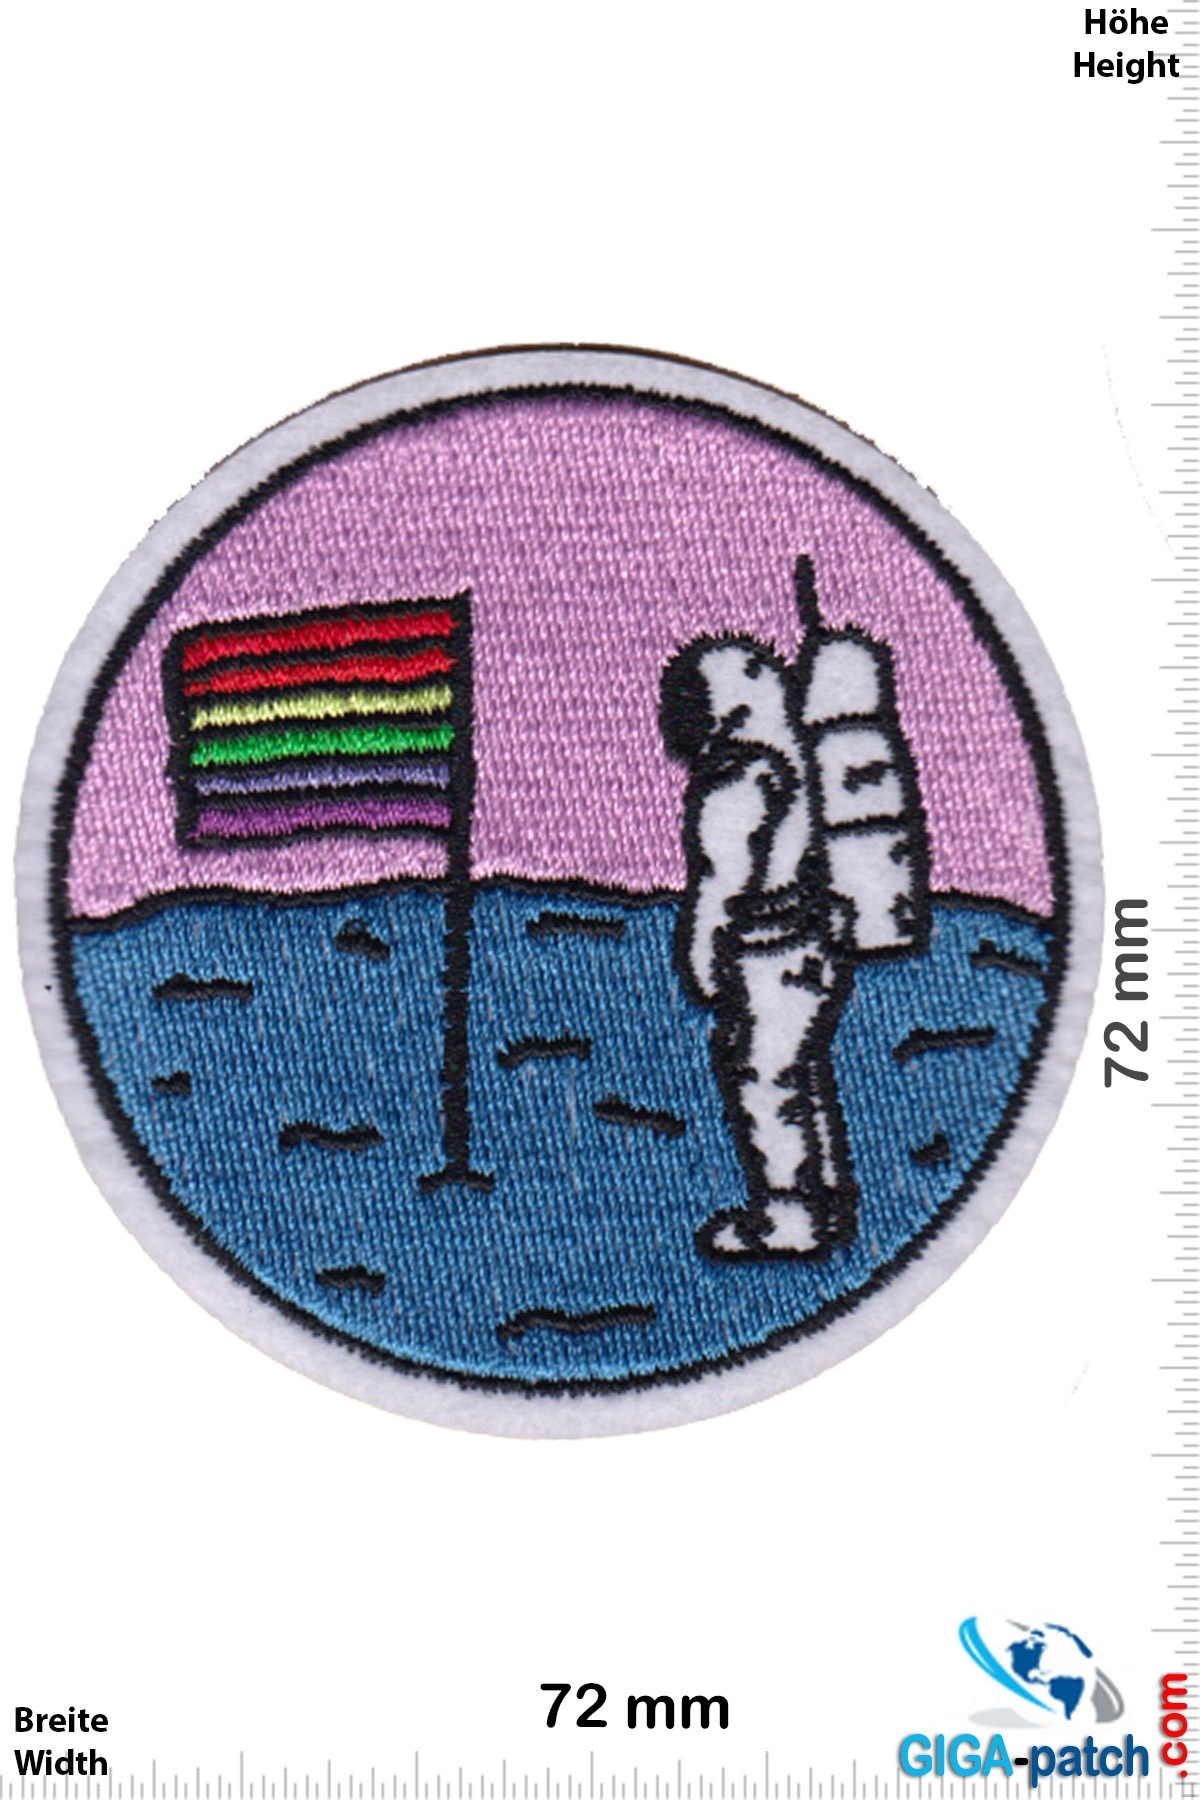 Download Nasa Patch Iron On Patch Keychains Stickers Giga Patch Com Biggest Patch Shop Worldwide